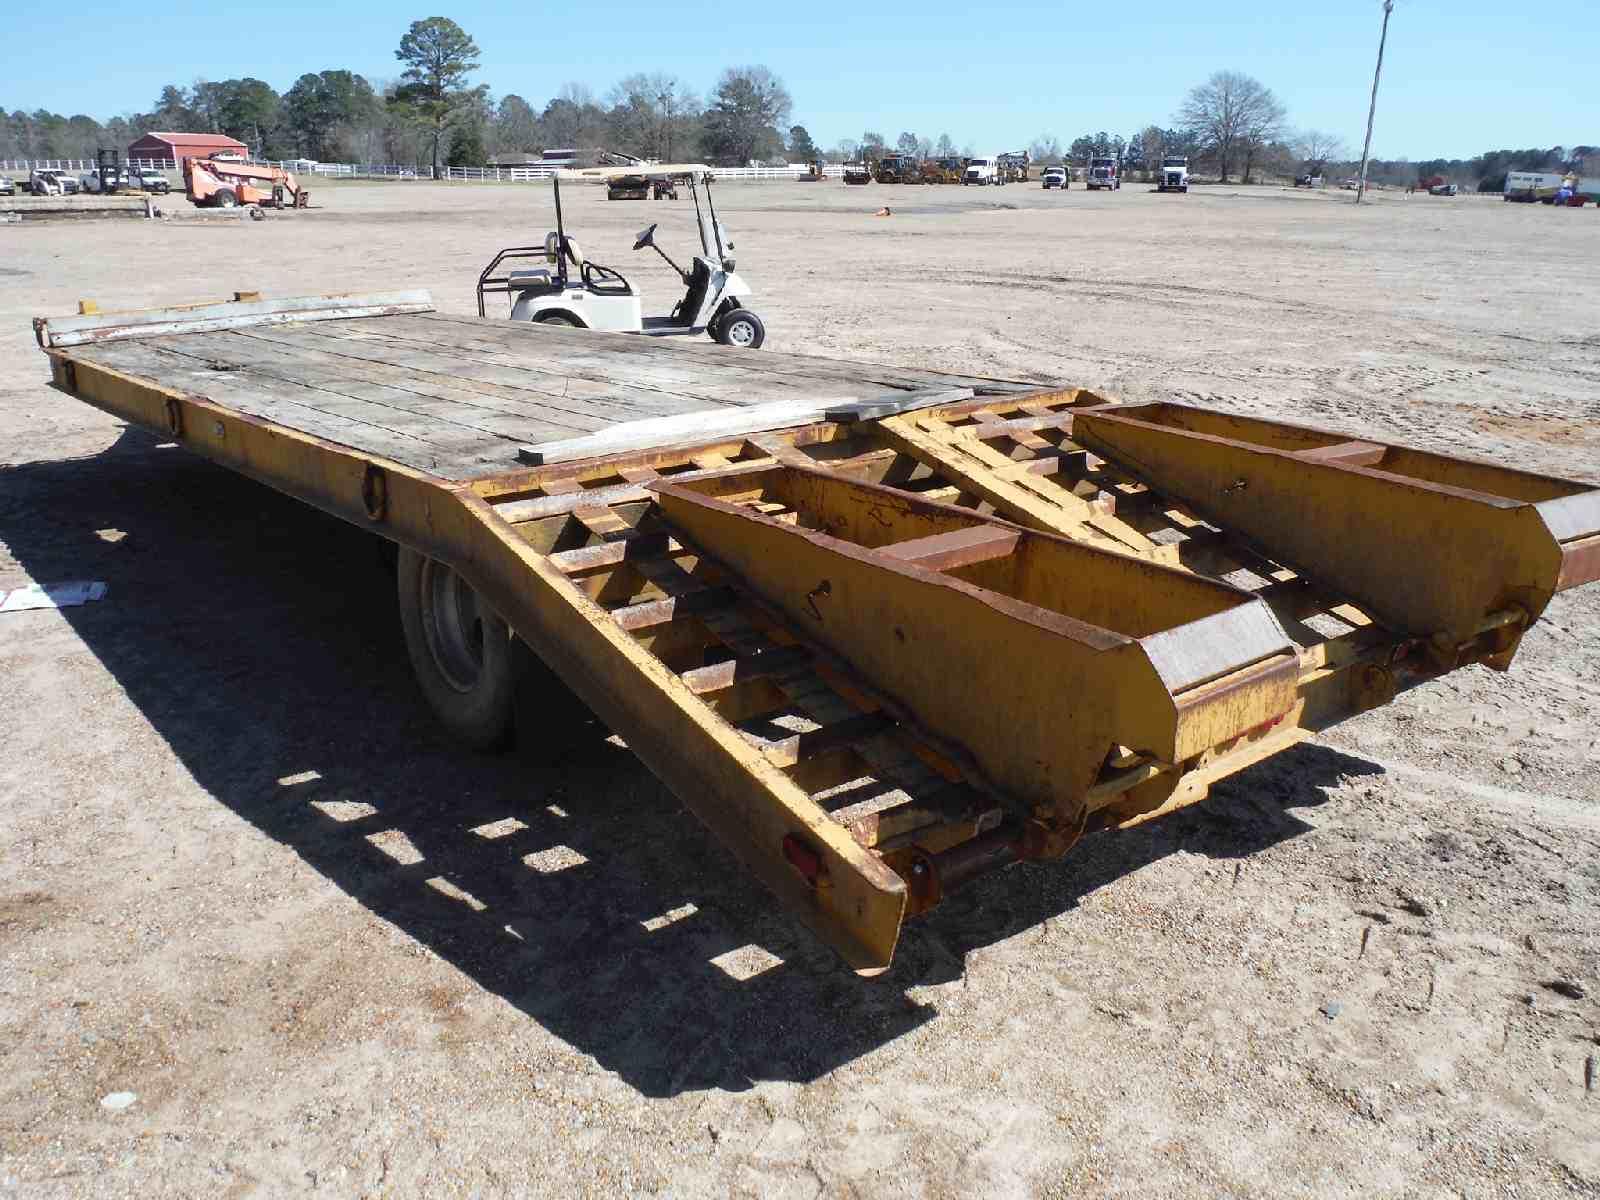 1985 Belshe 18' Tag Trailer, s/n 16JF01826F1016306: T/A, Pintle Hitch, 66"